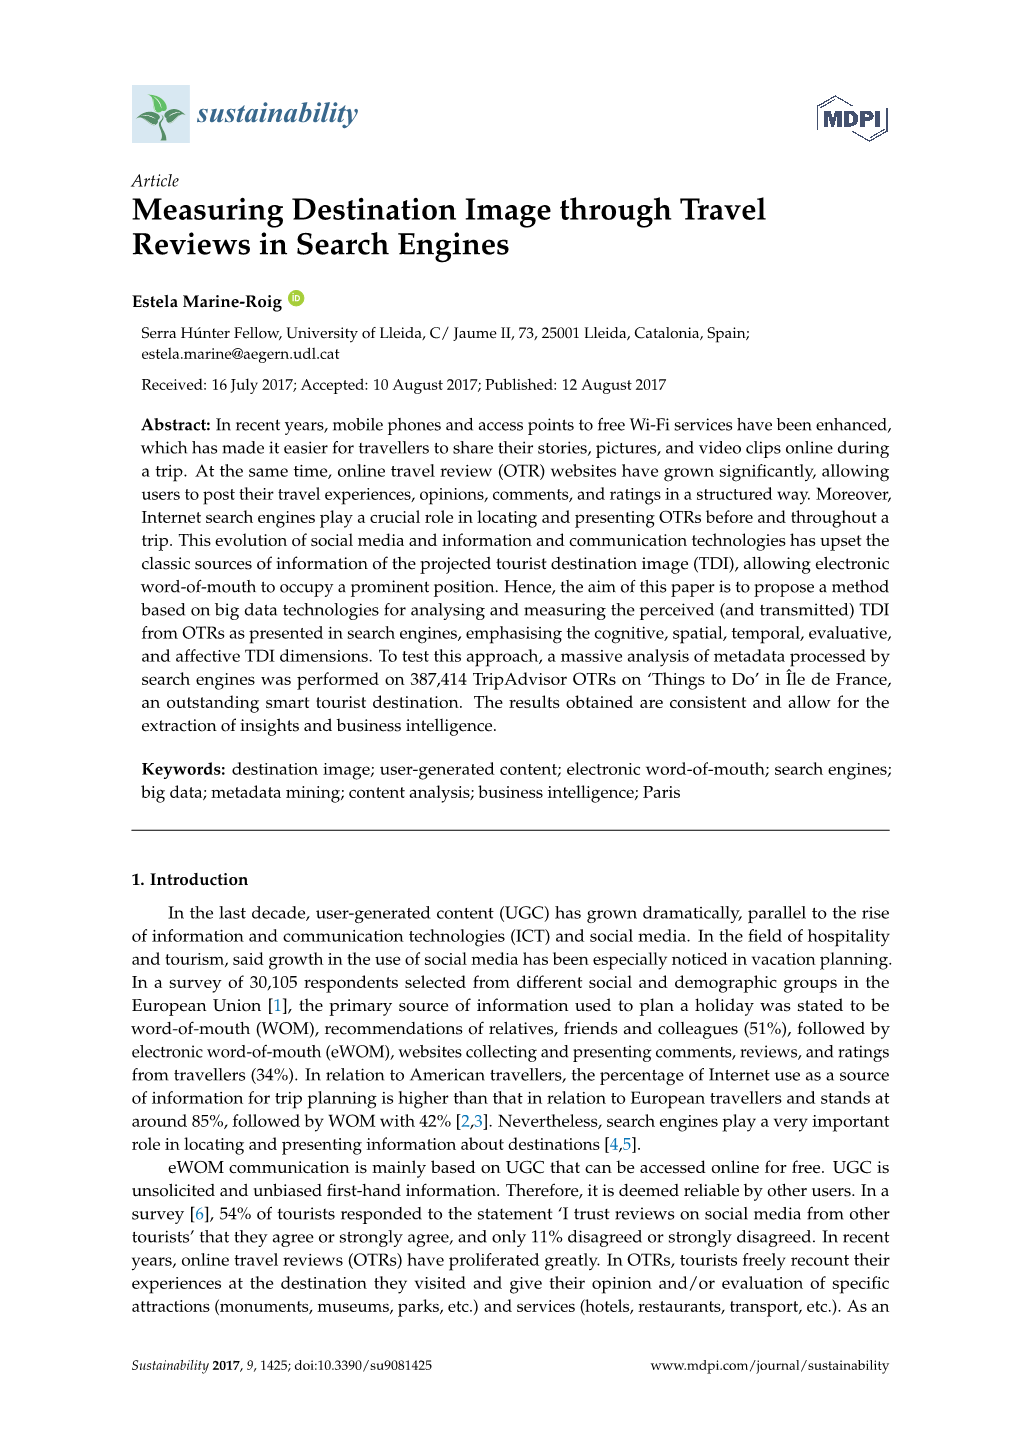 Measuring Destination Image Through Travel Reviews in Search Engines